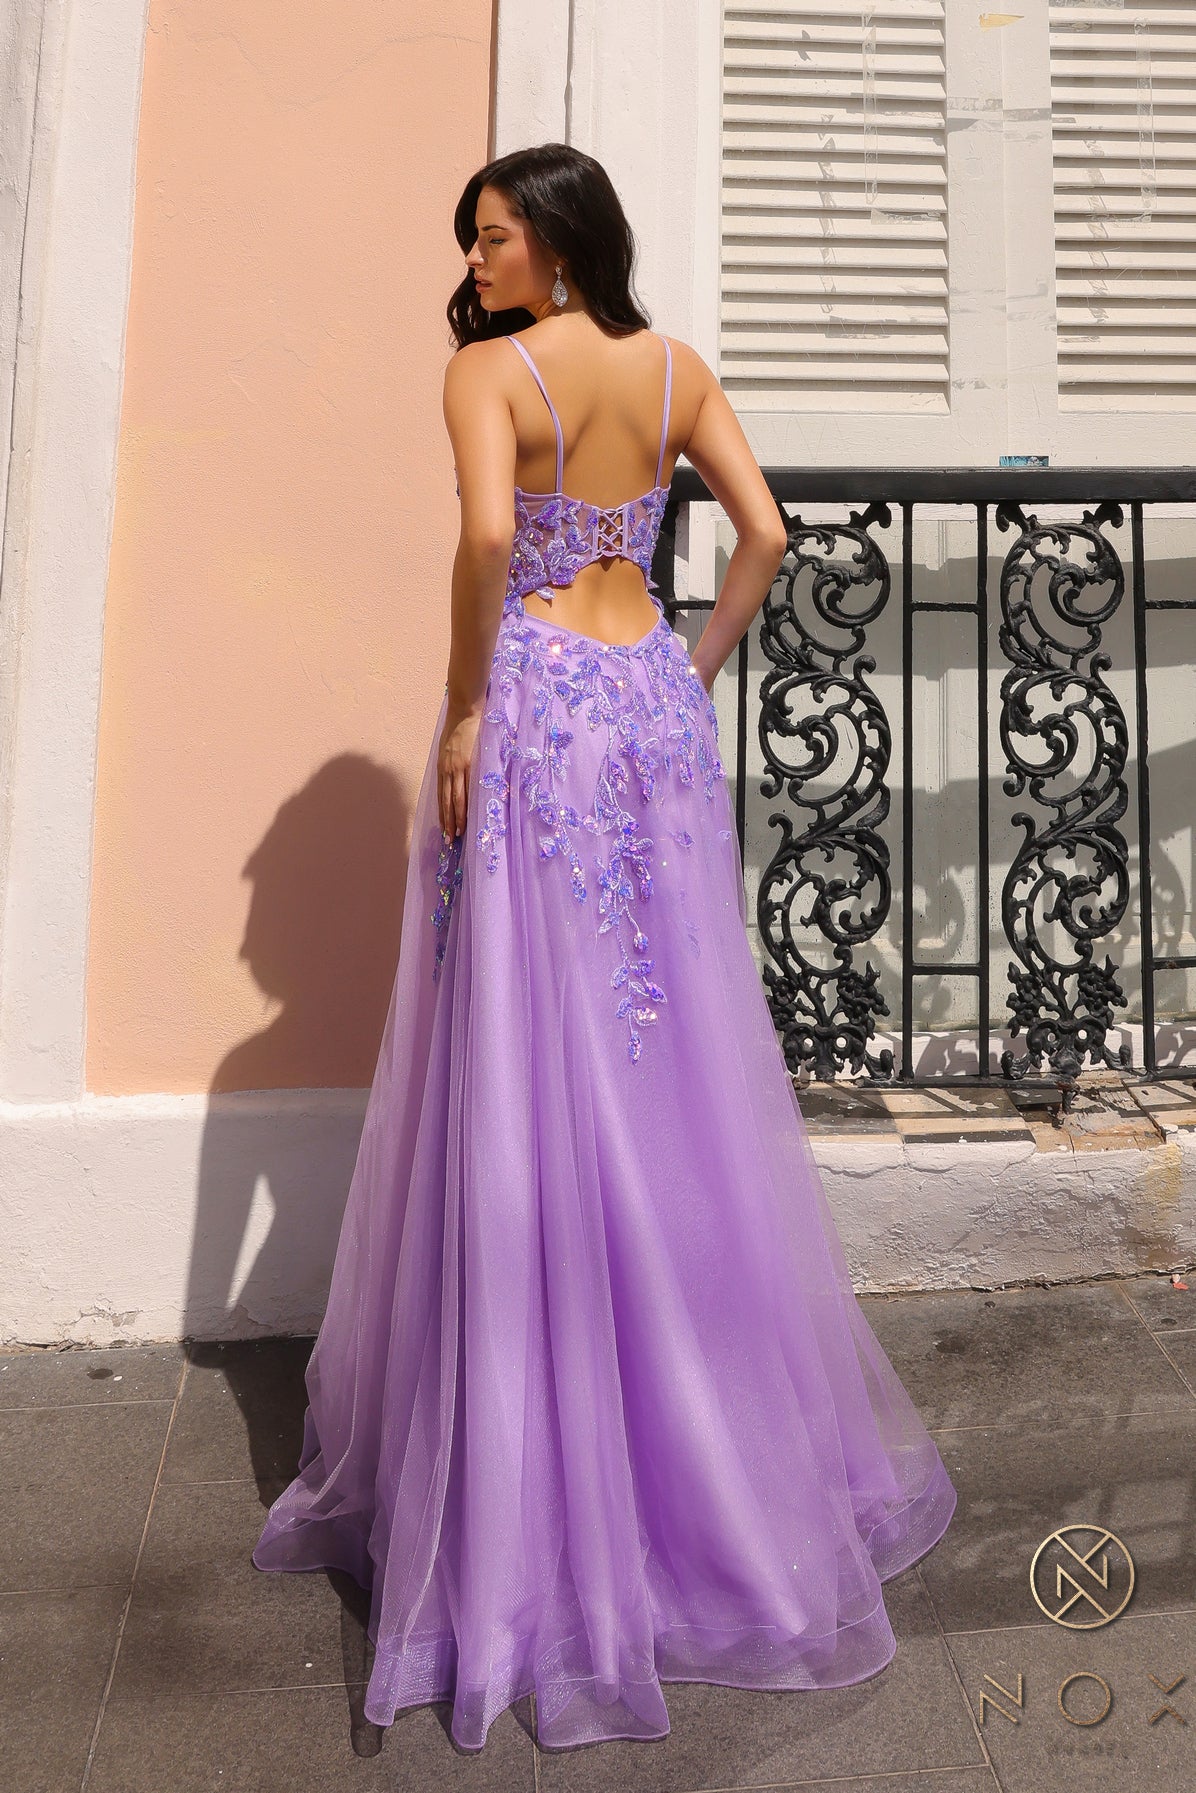 Elevate your style with the Nox Anabel H1350 A Line Maxi Dress. The dress features shimmering tulle and sequin lace, along with a corset bodice and open back cut out design and thigh-high slit. Perfect for formal events, this dress is a must-have for a statement-making entrance.  Sizes: 0-16  Colors: Black, Lavender, Royal Blue